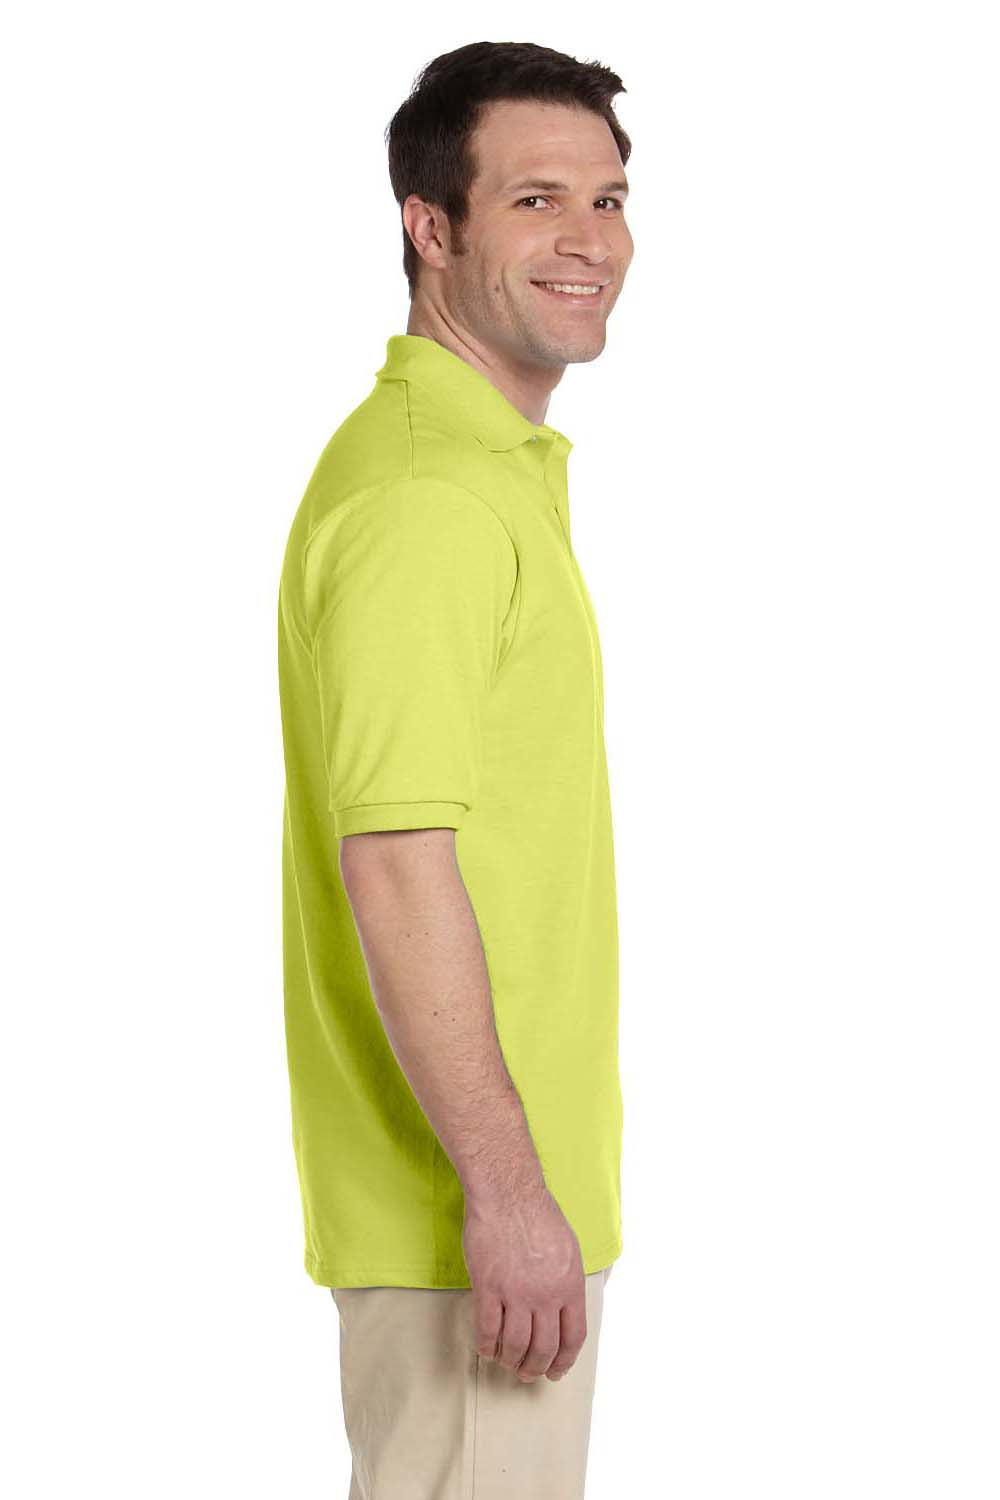 Jerzees 437 Mens SpotShield Stain Resistant Short Sleeve Polo Shirt Safety Green Side